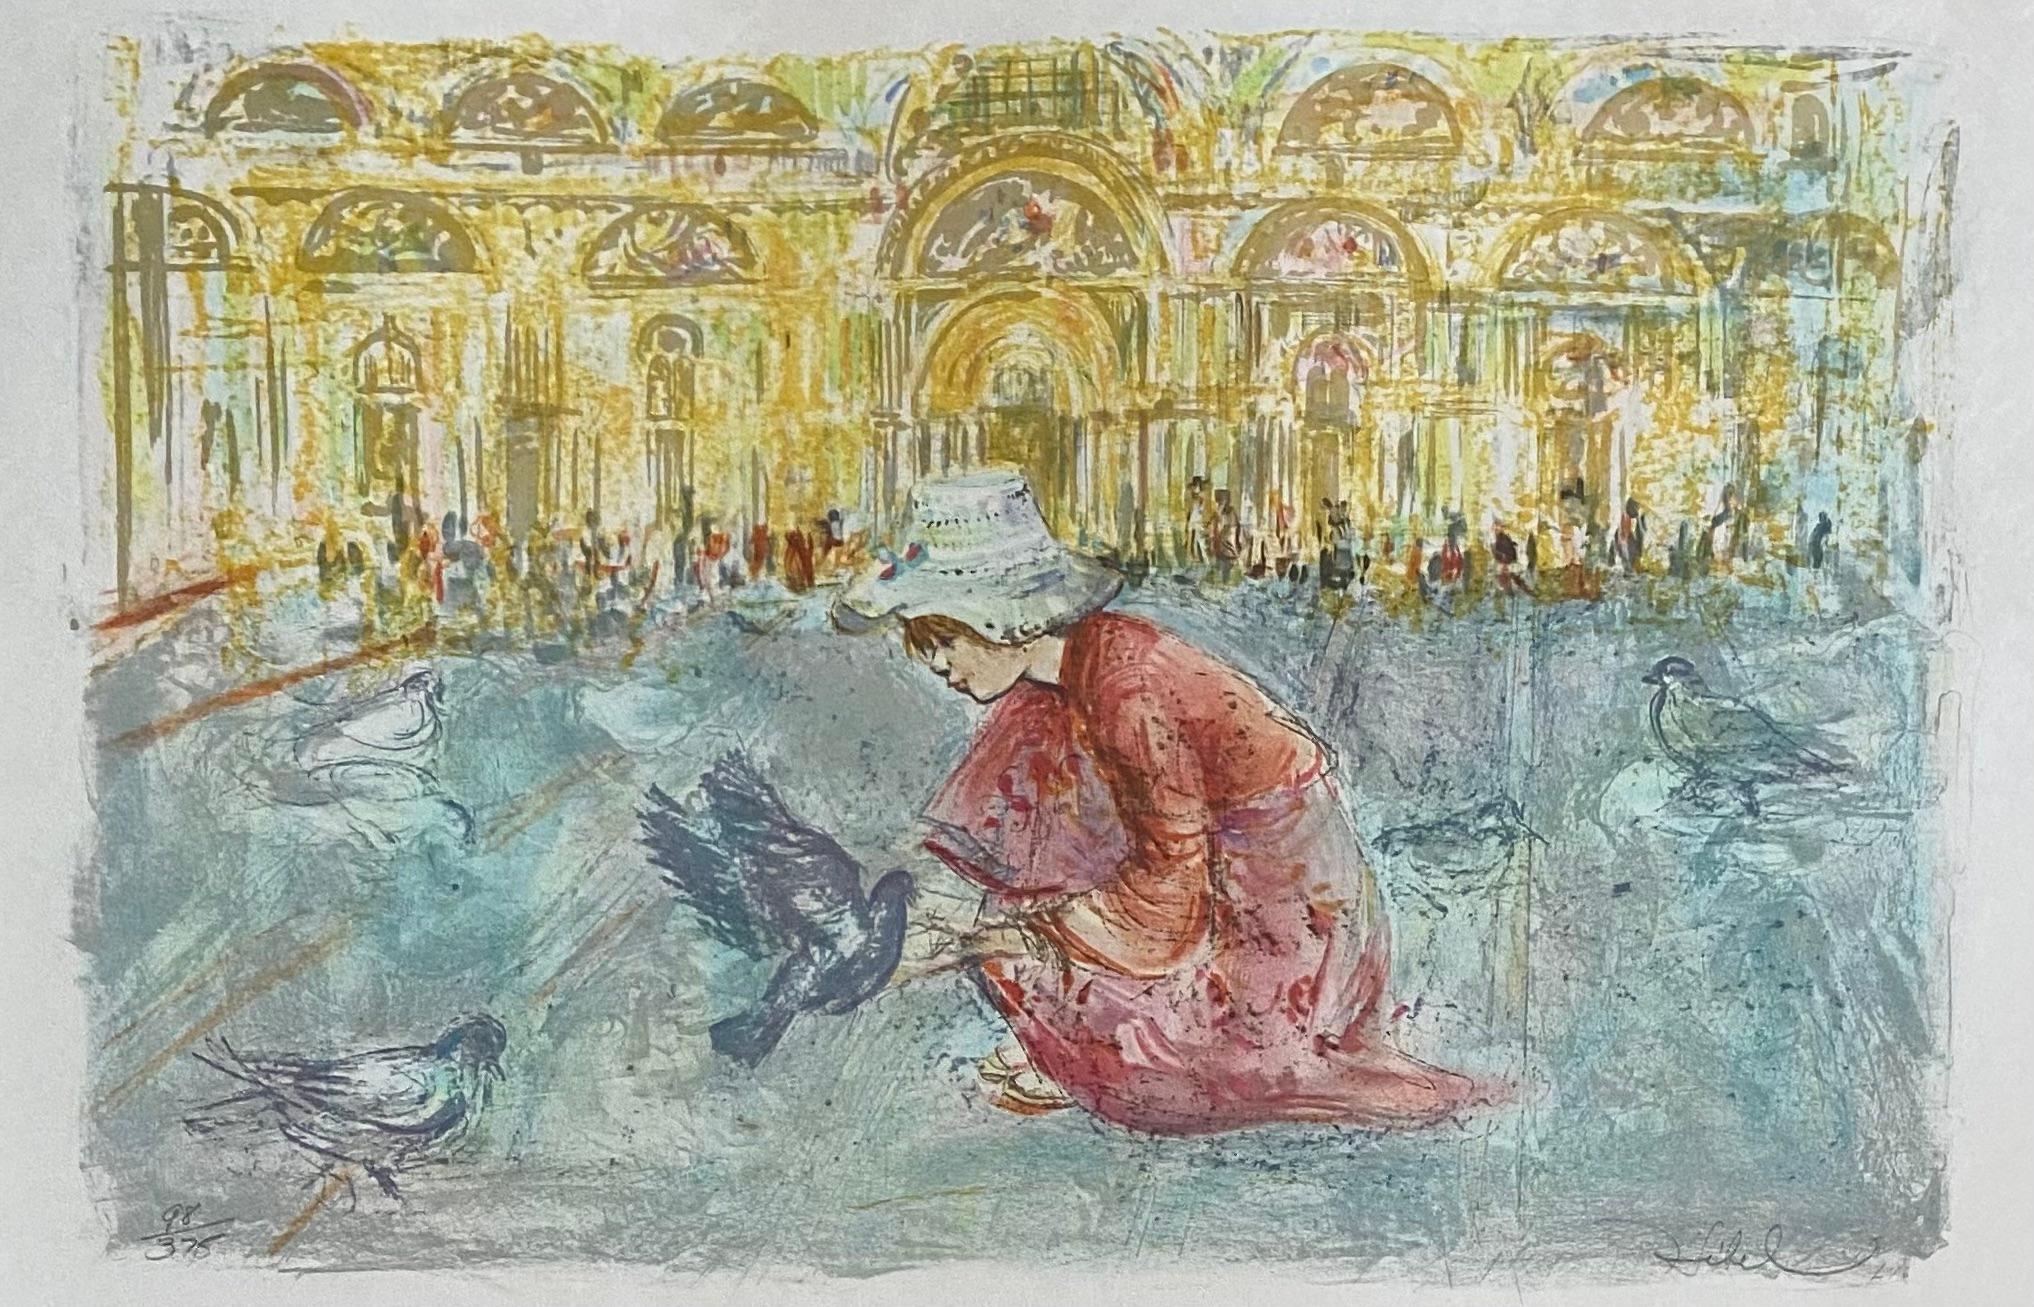 Edna Hibel color lithograph depicting Piazza San Marco or St. Mark's Square in Venice, Italy. Signed and Numbered. 

A very decorative piece of art by listed Post-Impressionist artist Edna Hibel. 
This beautiful artwork would enhance any space.